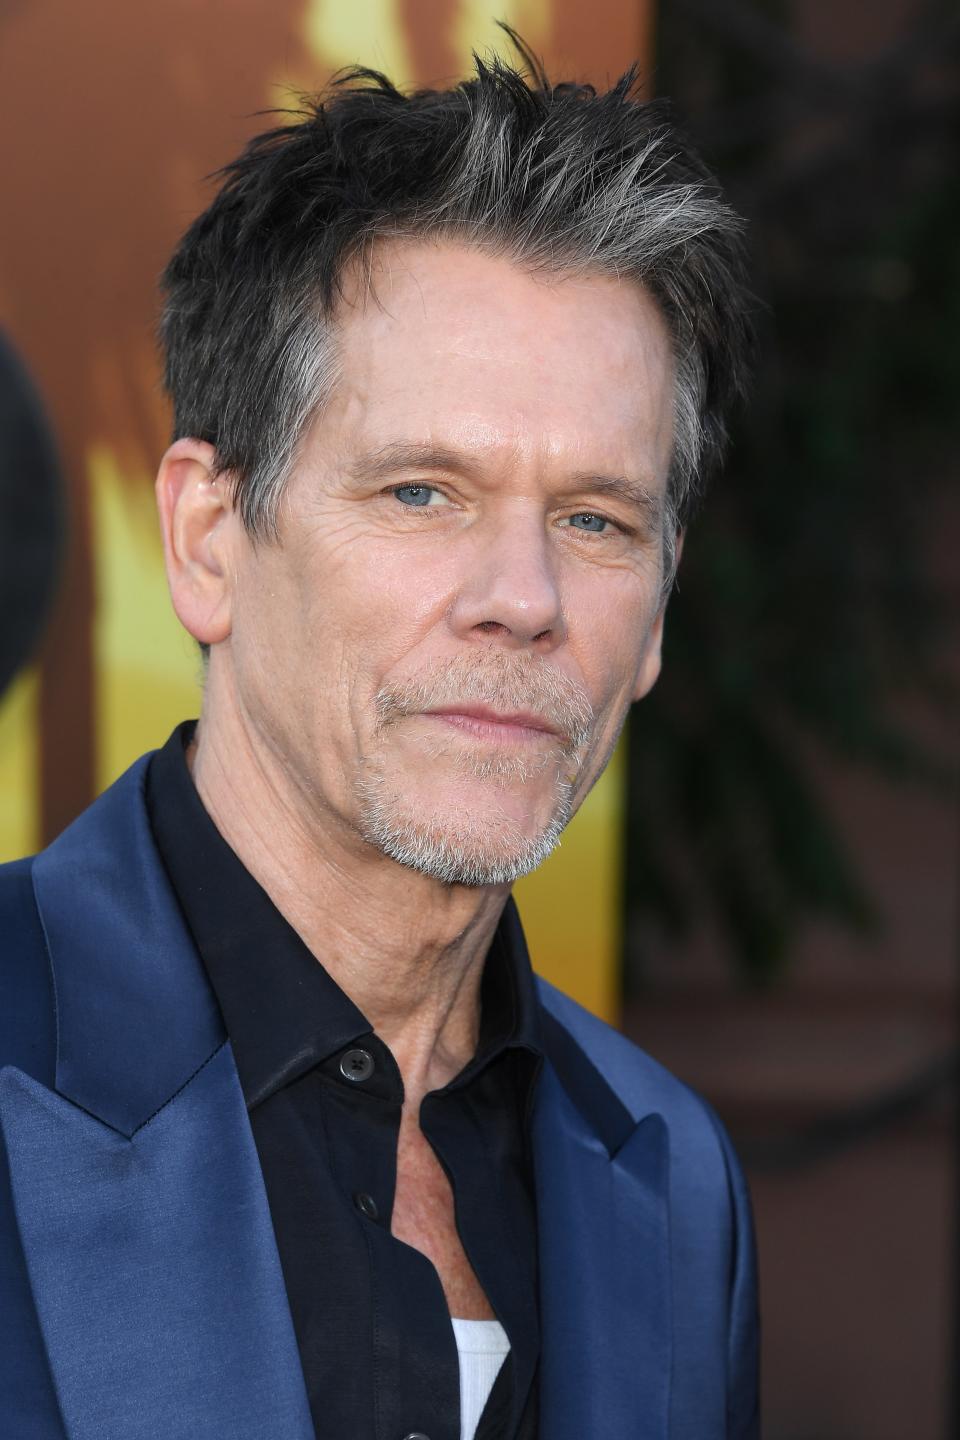 Kevin Bacon poses on a red carpet, wearing a dark suit with a white and black shirt underneath. He has short, styled hair and a slight smile